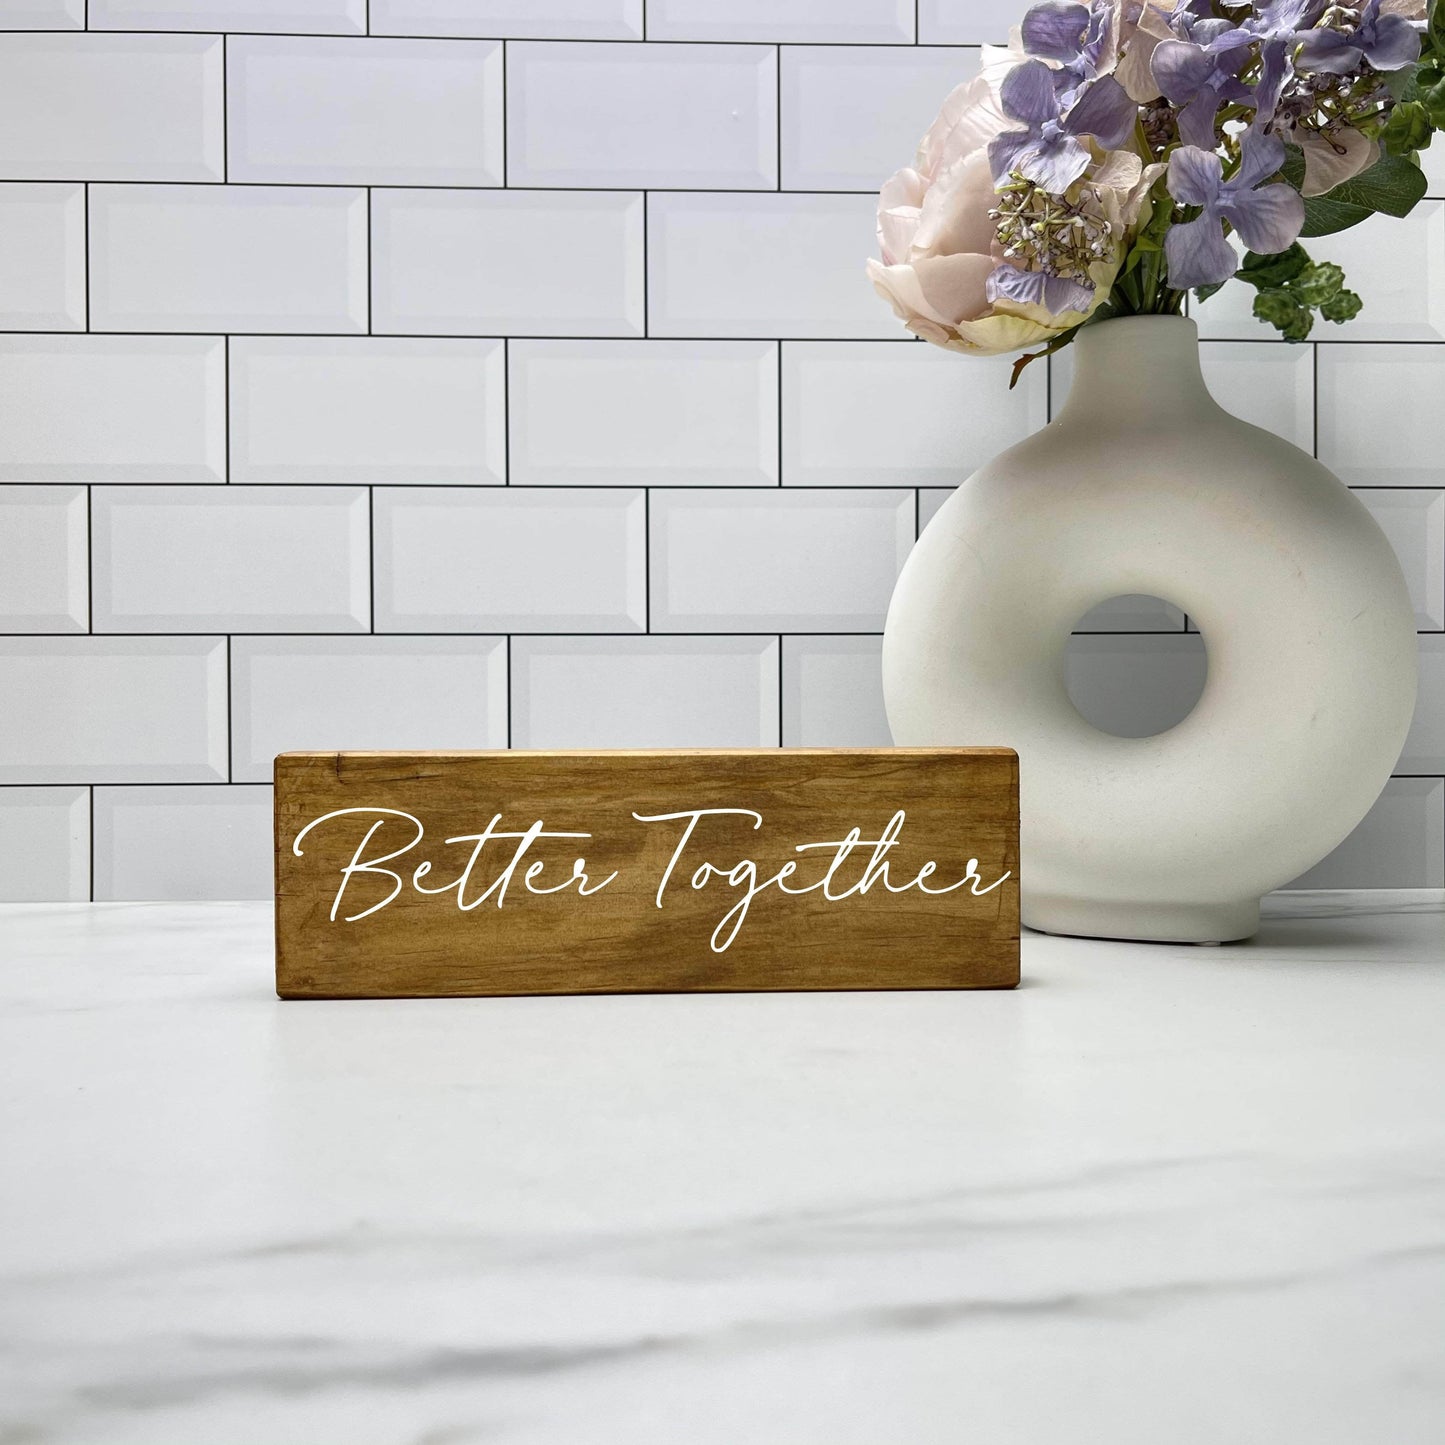 Better together wood sign, love sign, couples gift sign, quote sign, home decors